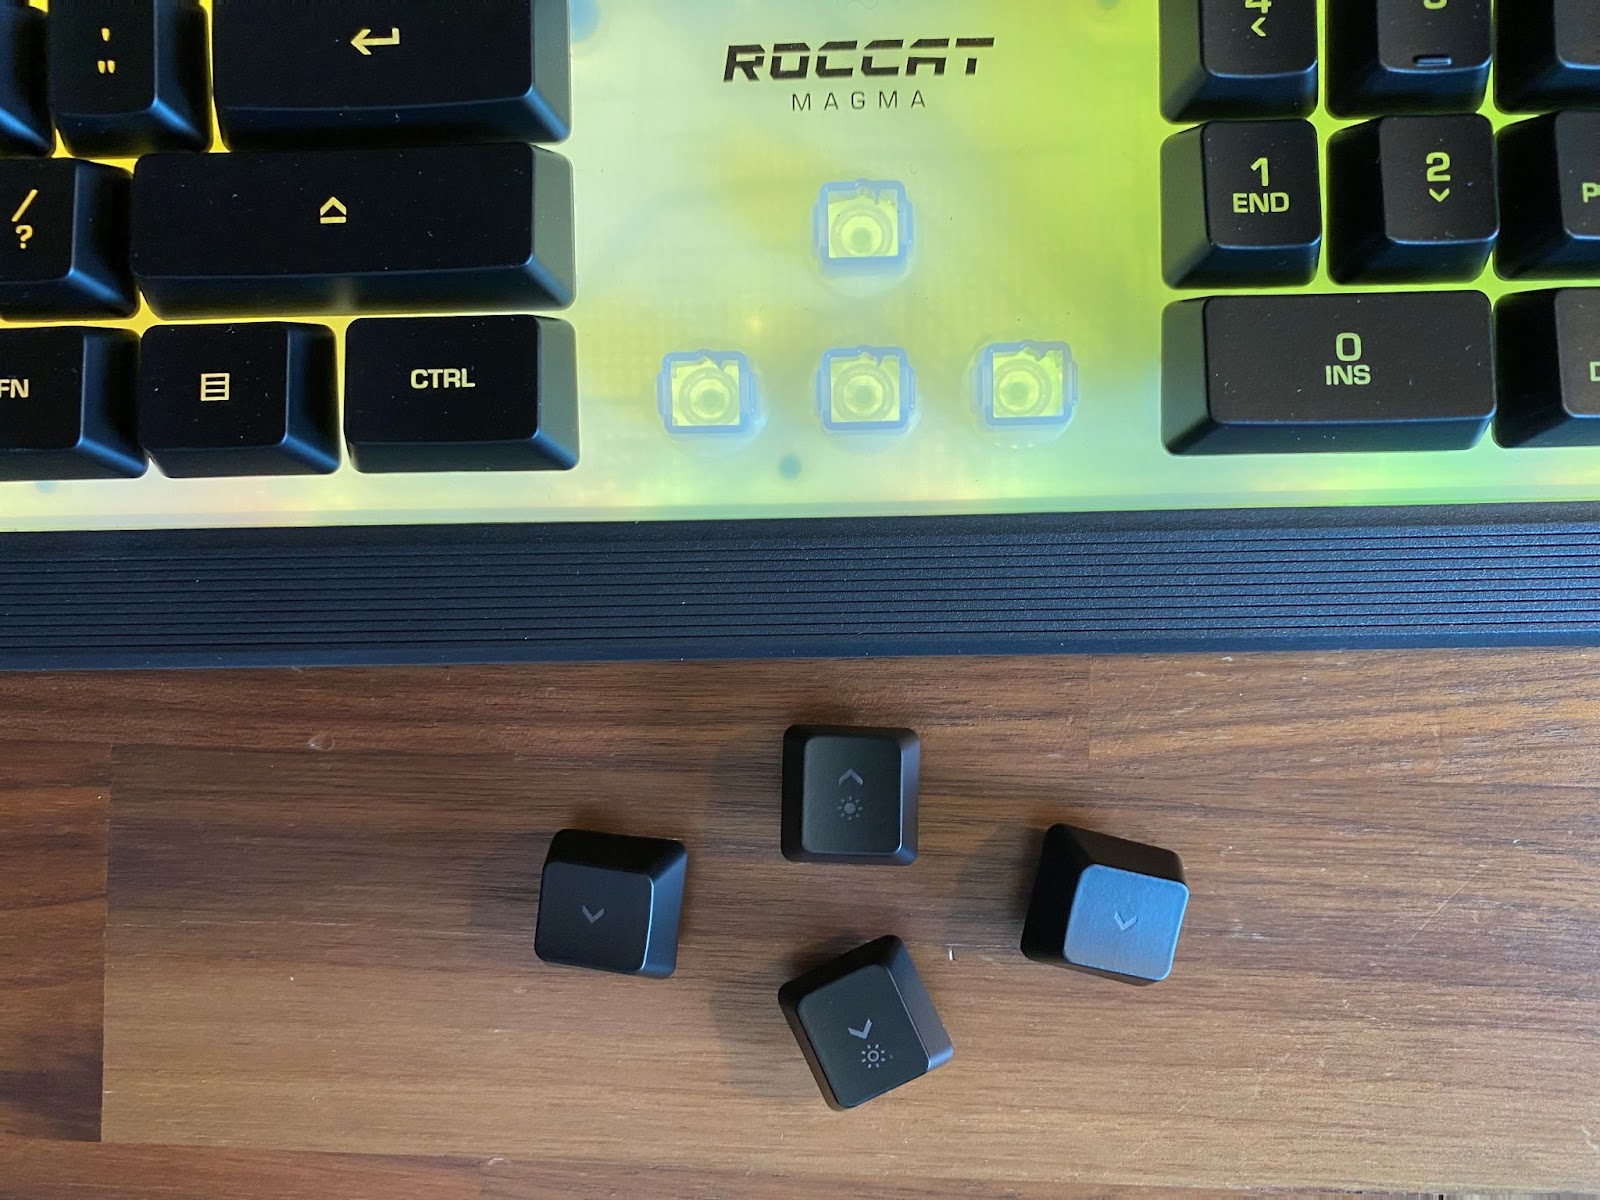 Silence is golden: ROCCAT Magma keyboard review - Dot Esports